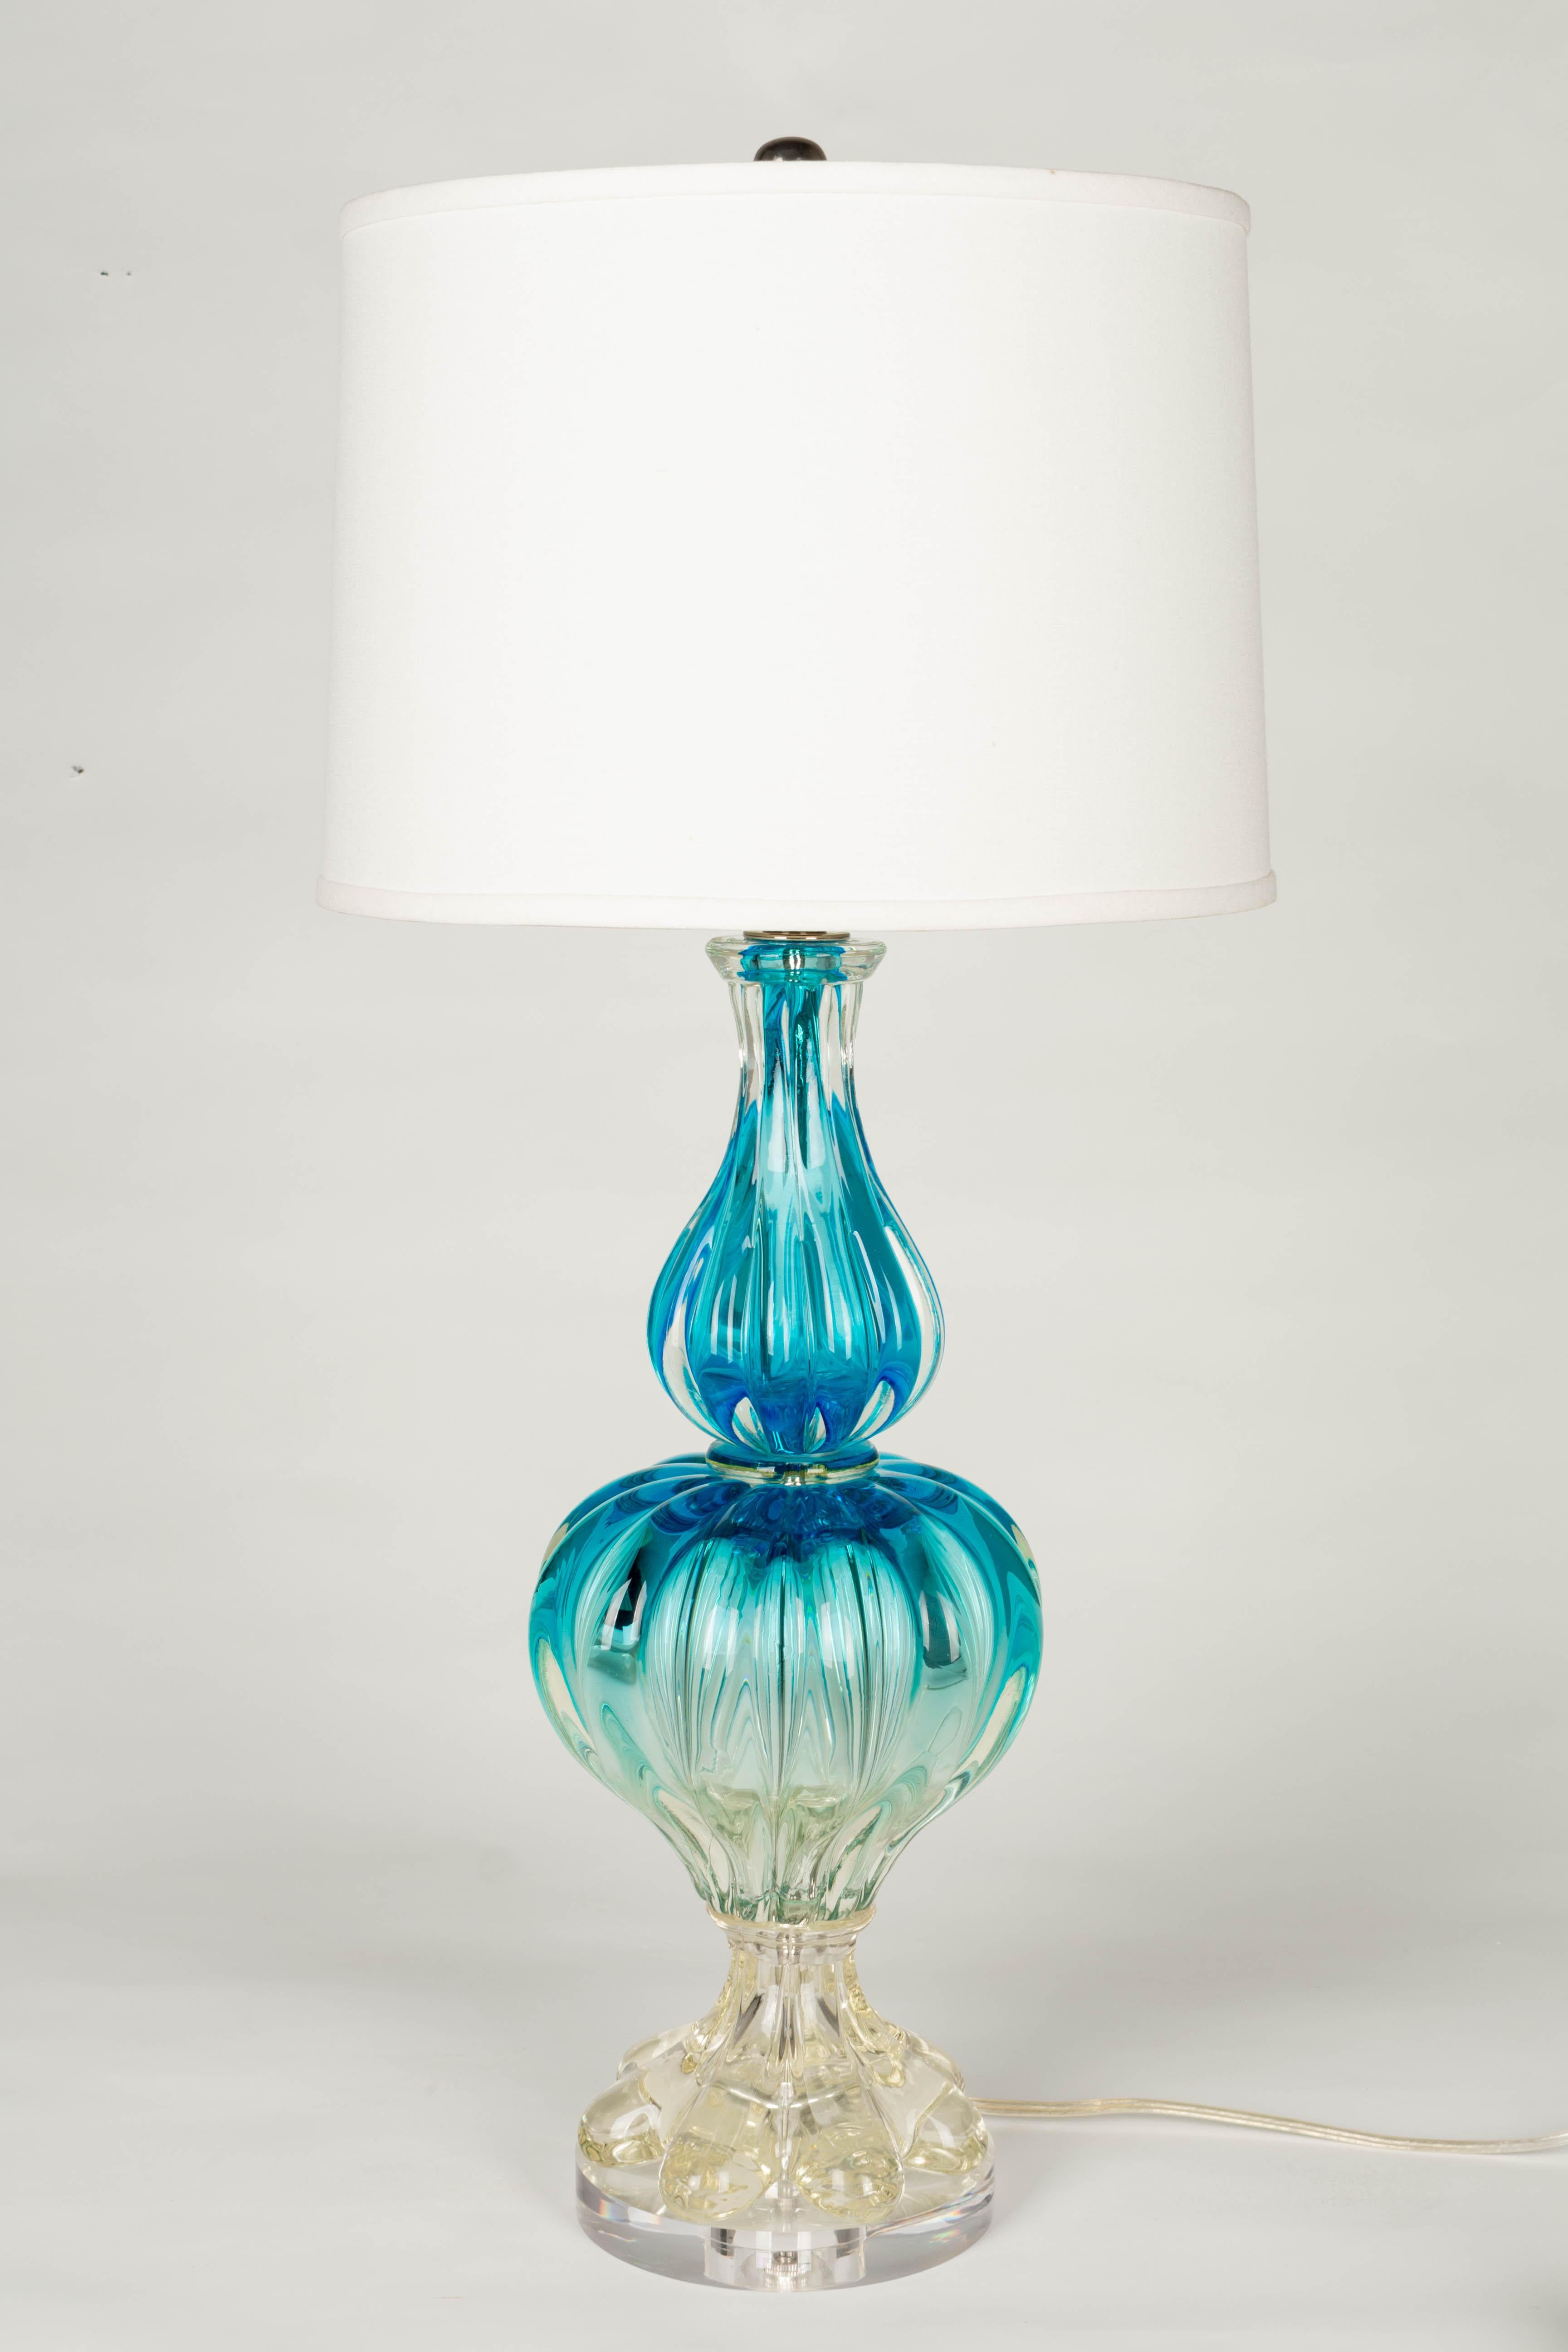 A midcentury Murano glass lamp in beautiful aquamarine color with blue at the top and fading to clear at the bottom. Three heavy, thick ribbed, hand blown glass pieces. New lucite base. Rewired with new socket. Shade is NOT included. 
Dimensions: